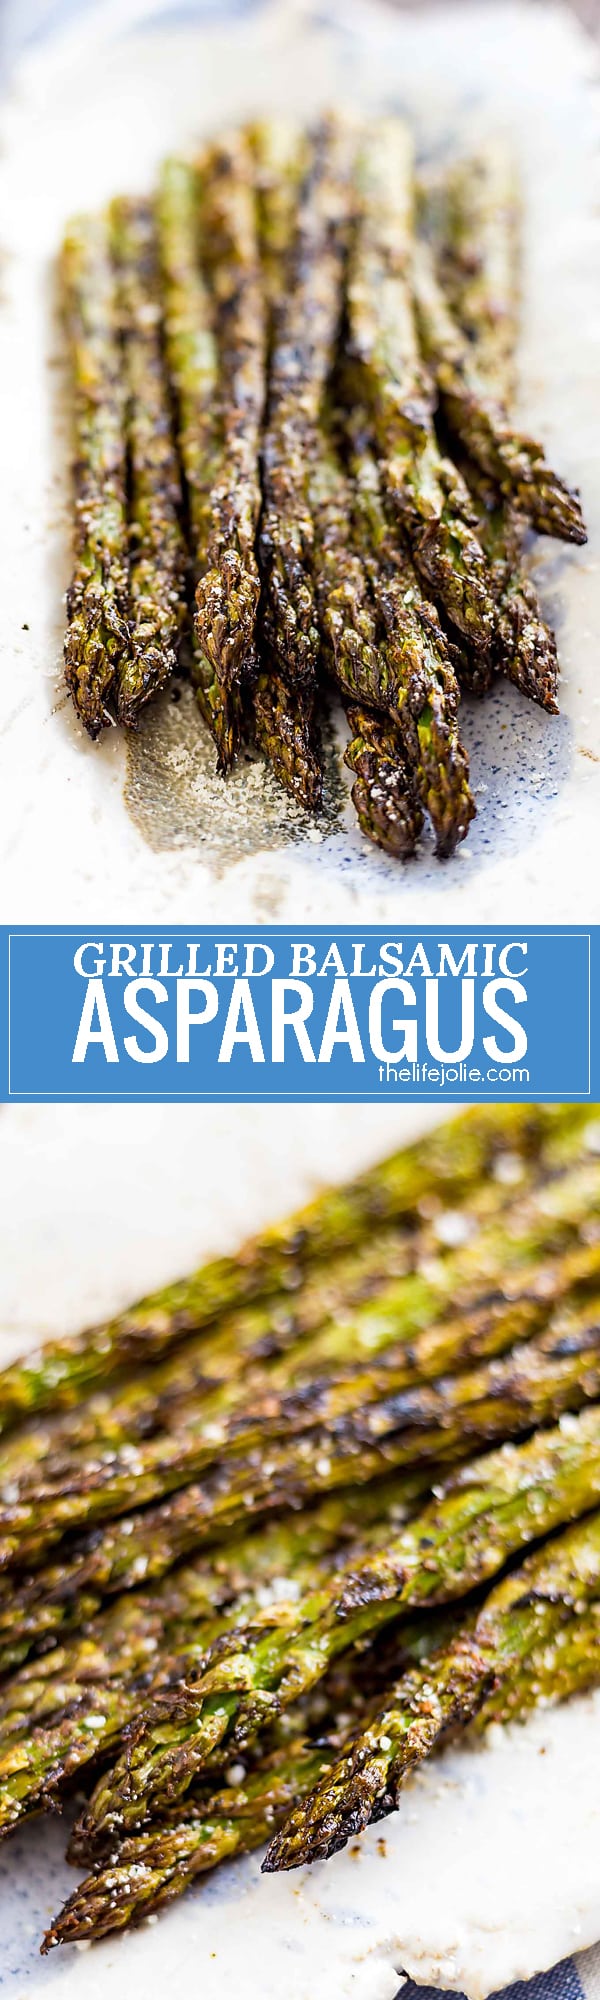 This easy Balsamic Grilled Asparagus recipe is the absolute best way to cook asparagus! It only takes 15 minutes and cooks up perfectly on your BBQ for a simple, crispy, healthy and flavorful summer side dish.